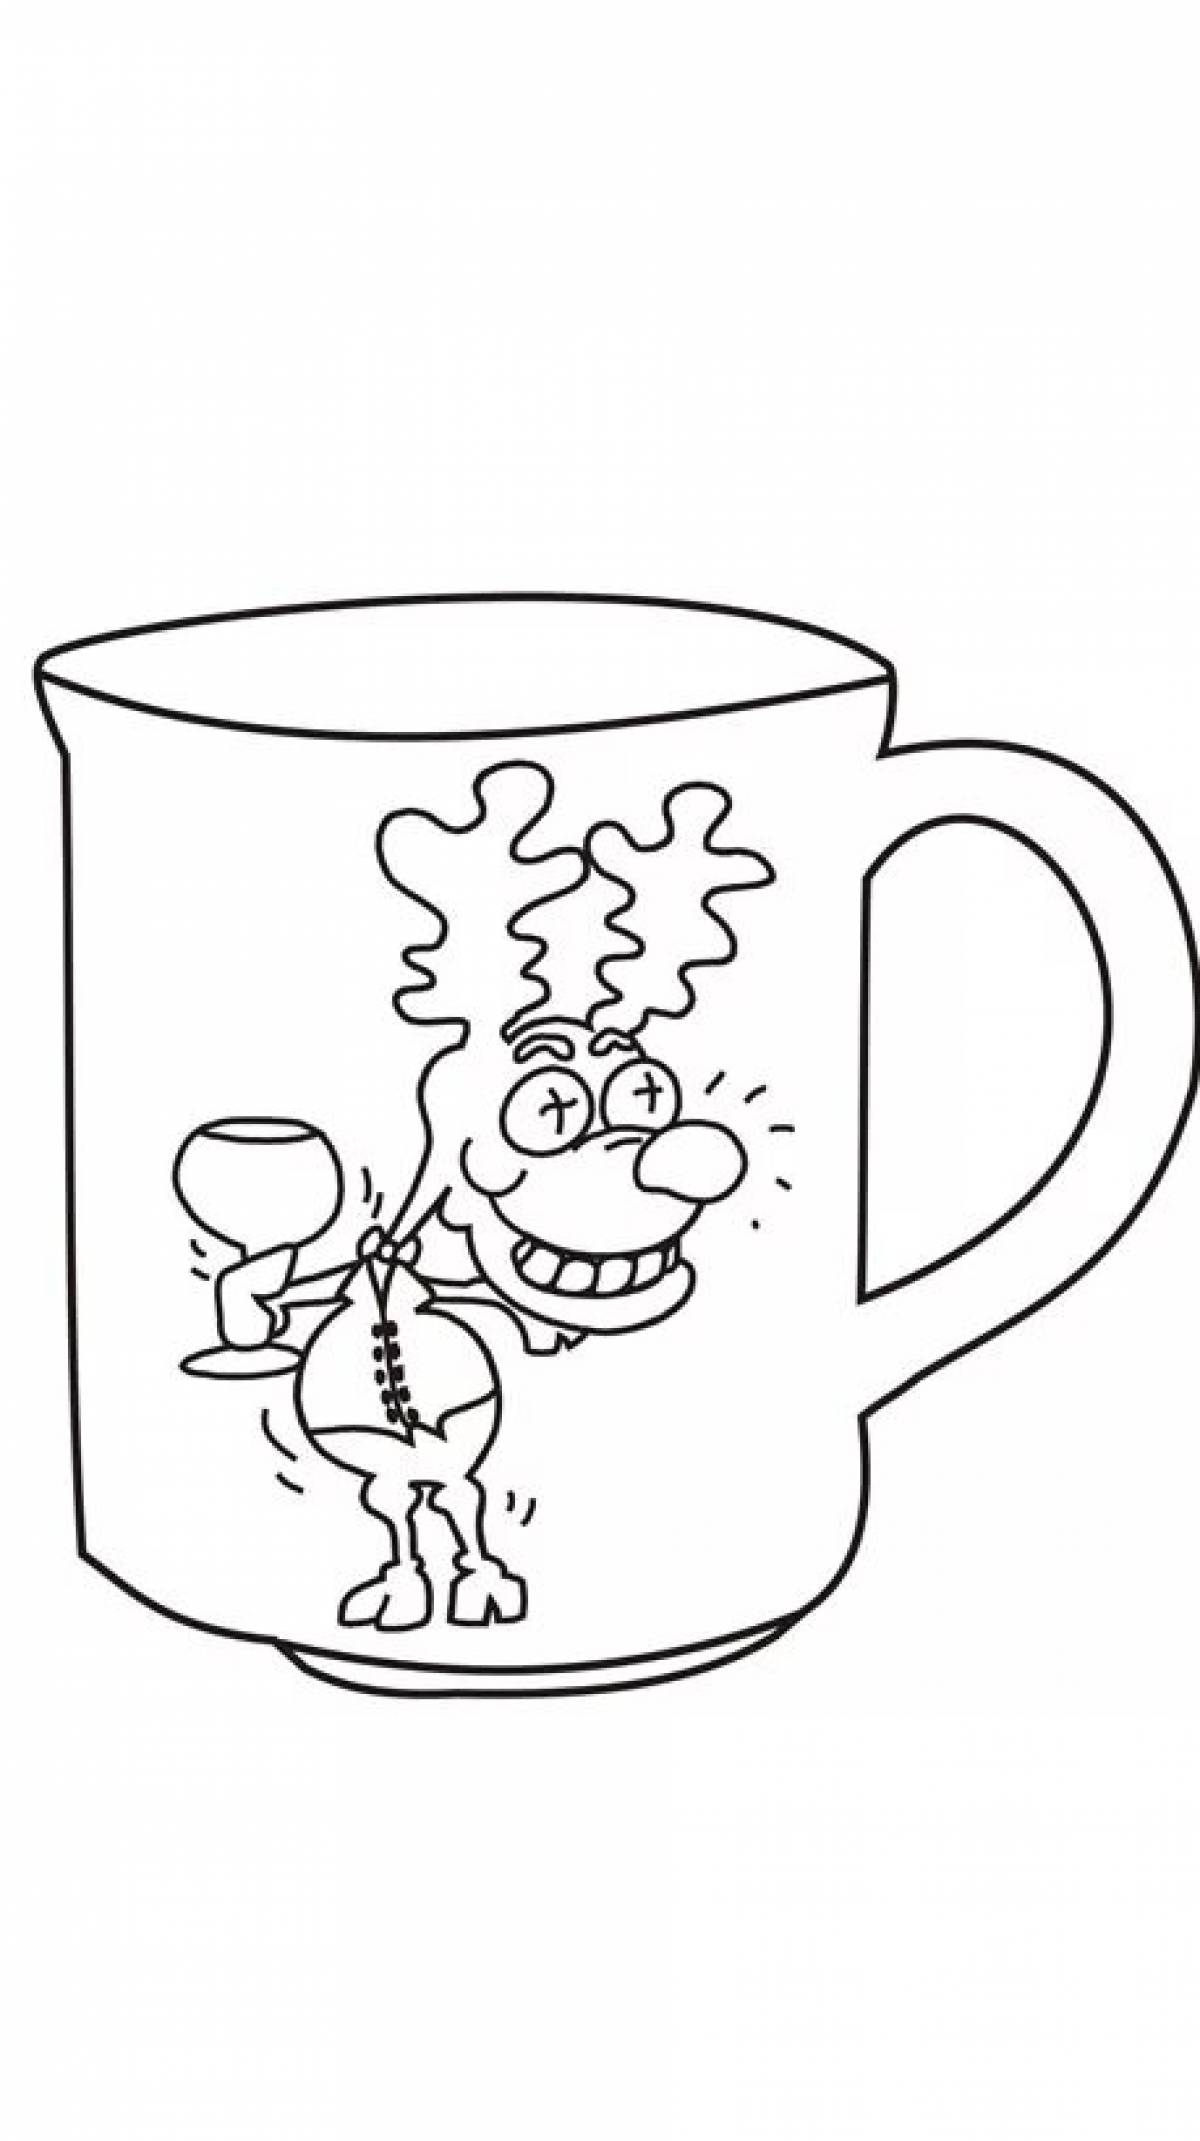 Coloring page unusual mugs and cups